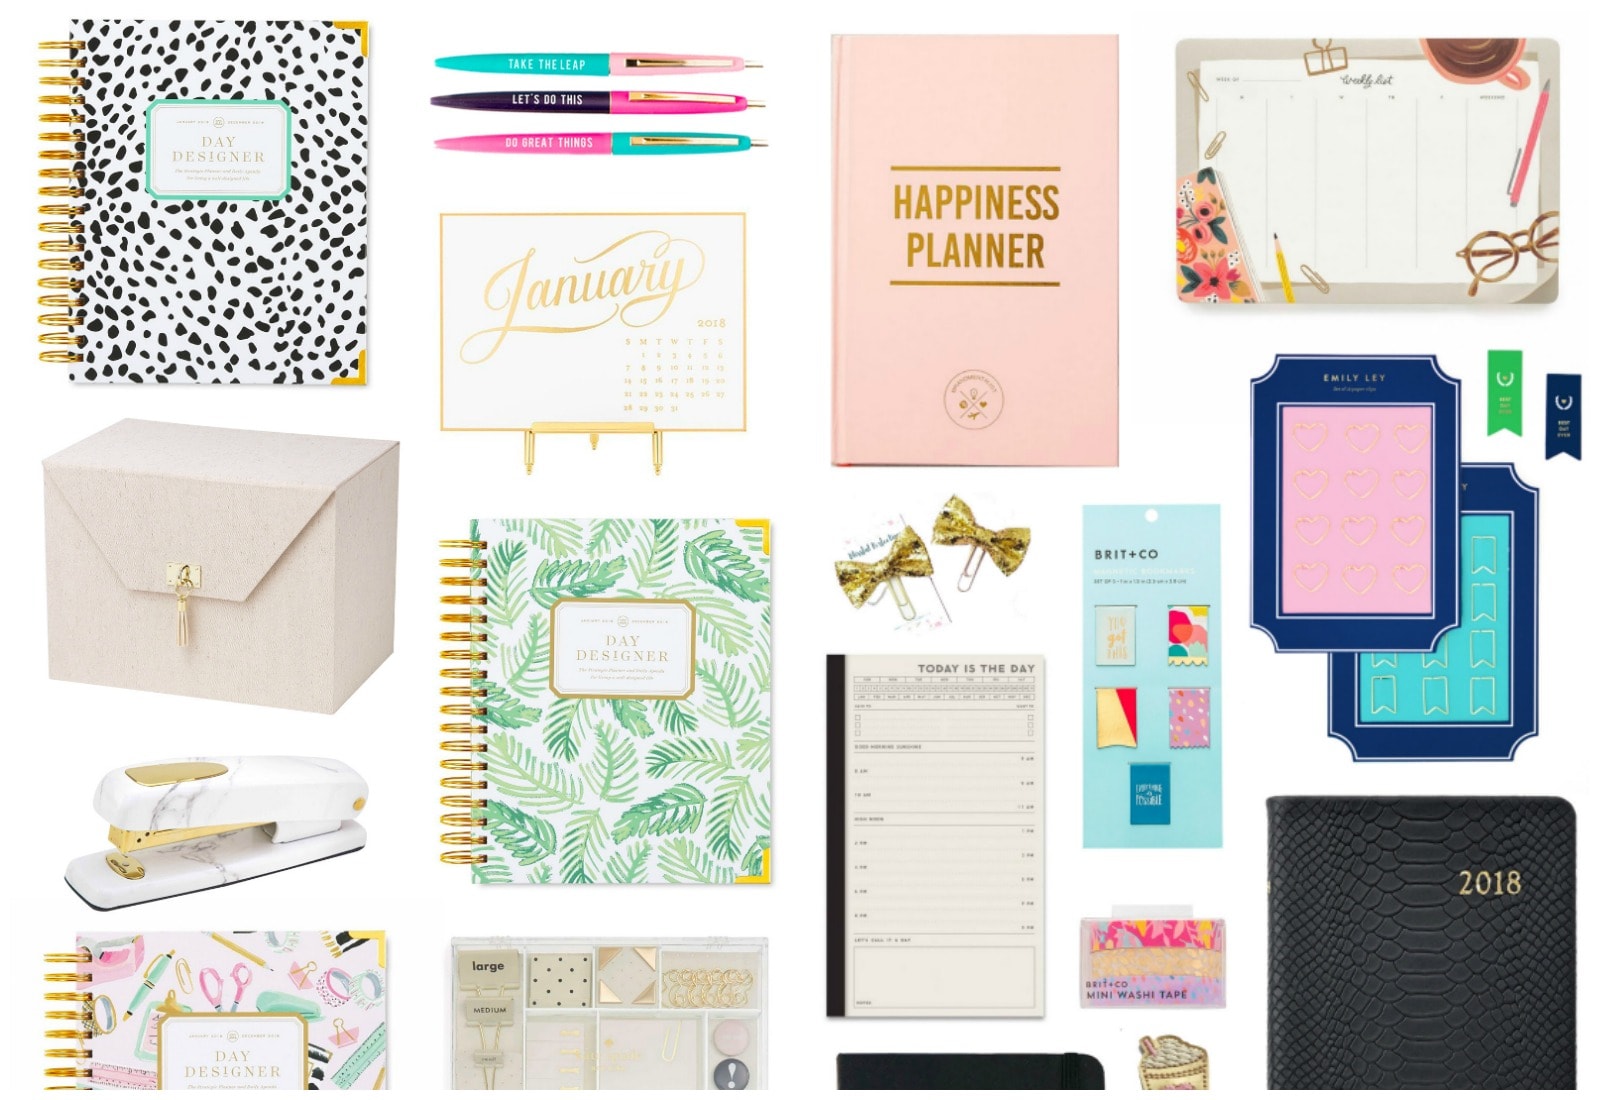 Cute Planners for 2018 | Organization planner | Cute planners | Planners for woman | Ashley Brooke Nicholas